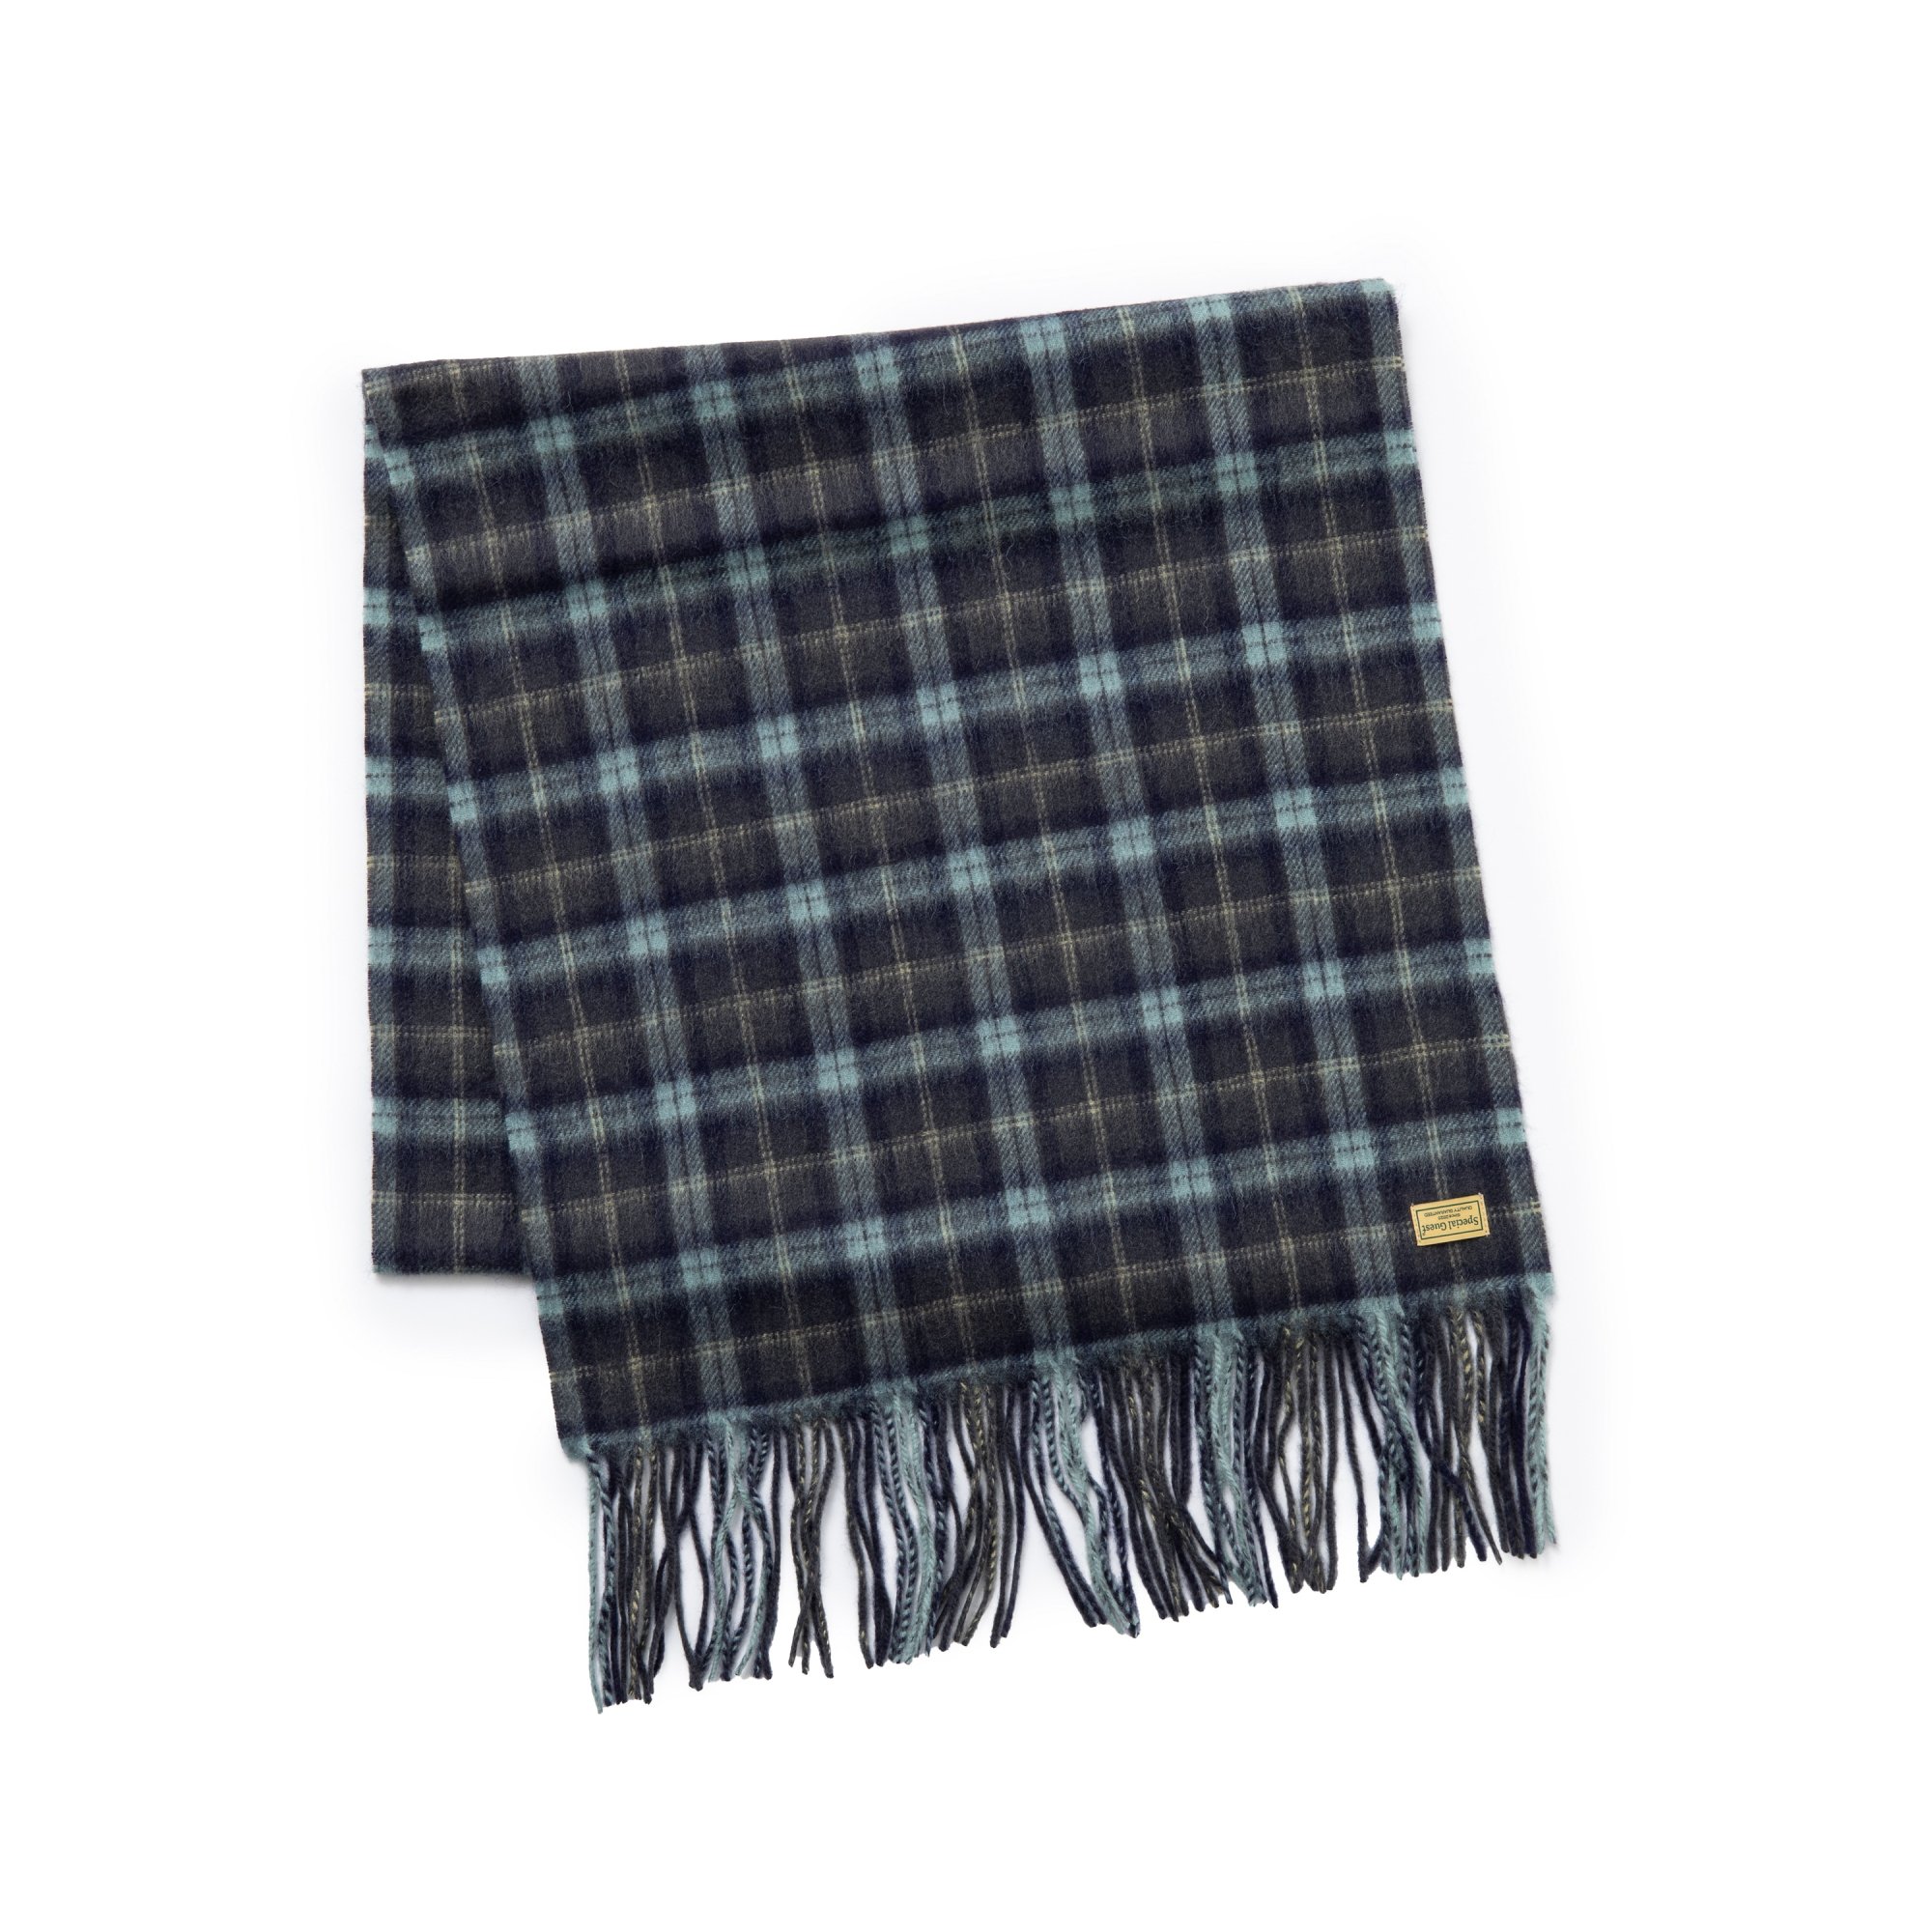 SPECIAL GUEST<br>SG Check scarf<br>